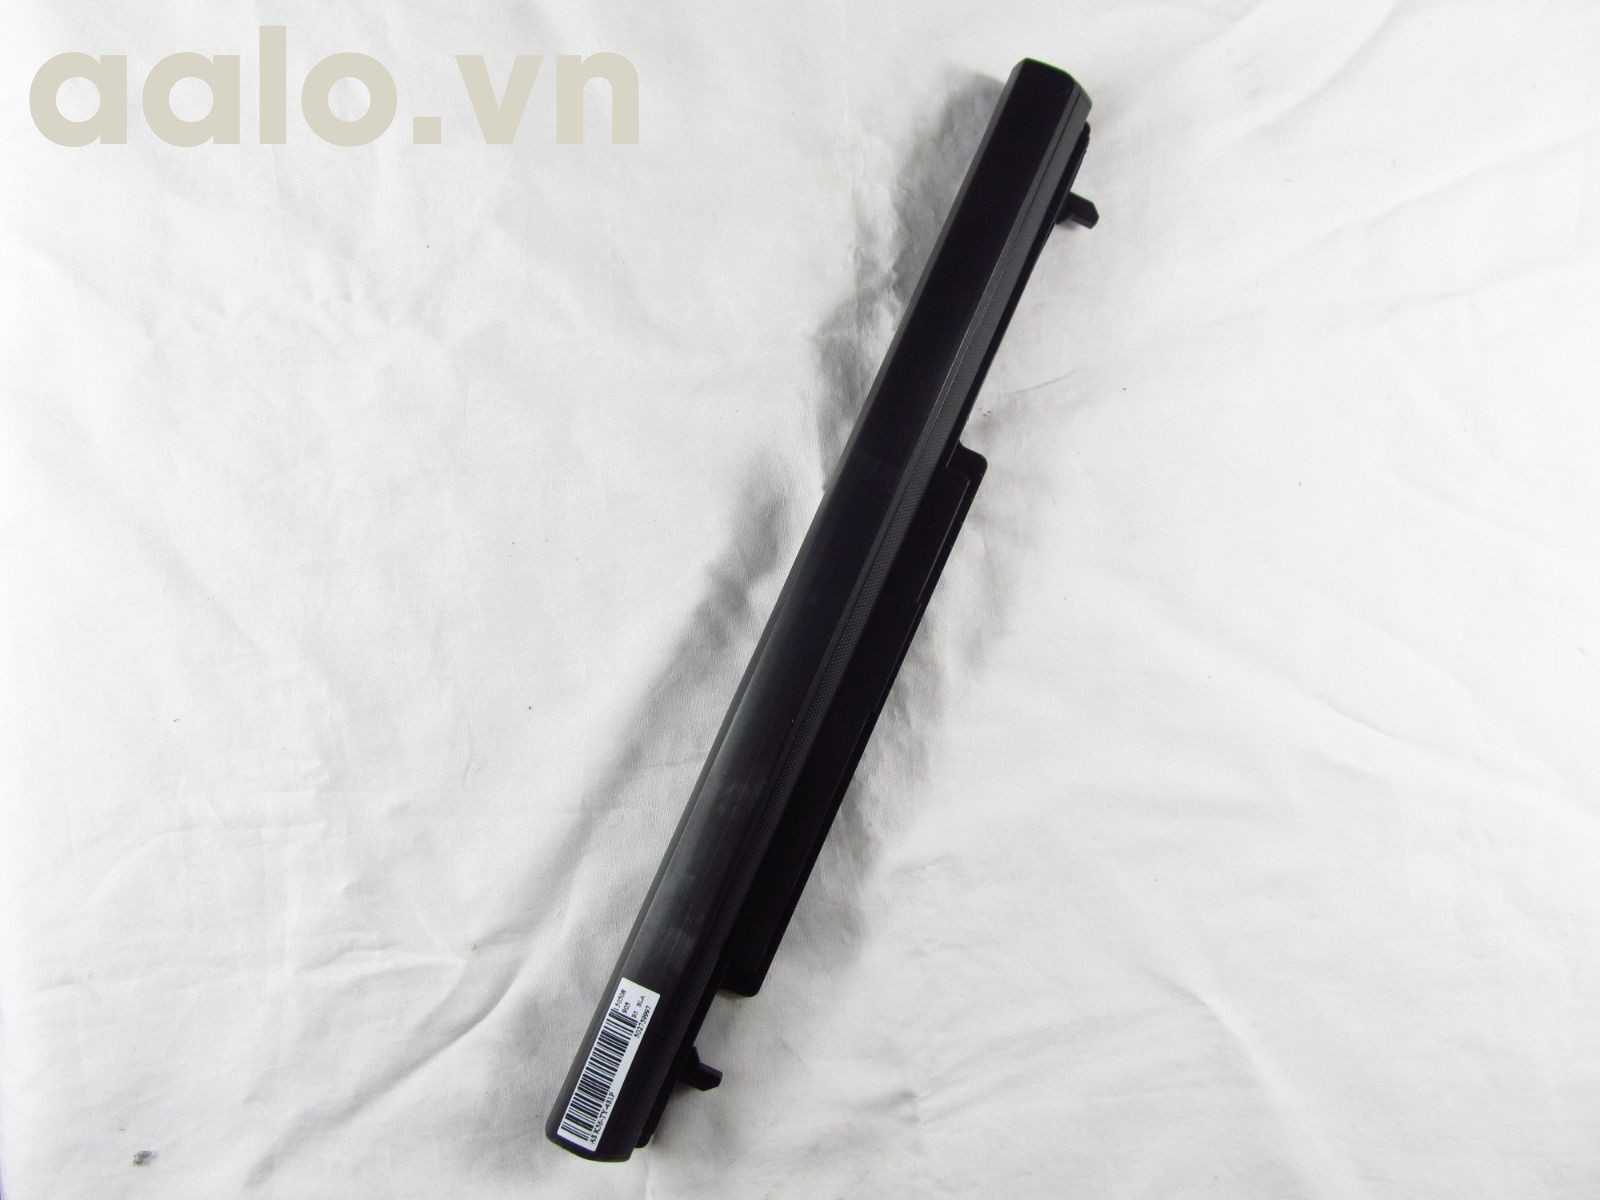 Pin Laptop Asus A46 A46E A46SV A56 K46 K56 A46C K46C K56C A31-K56 A42-K56  - Battery Asus